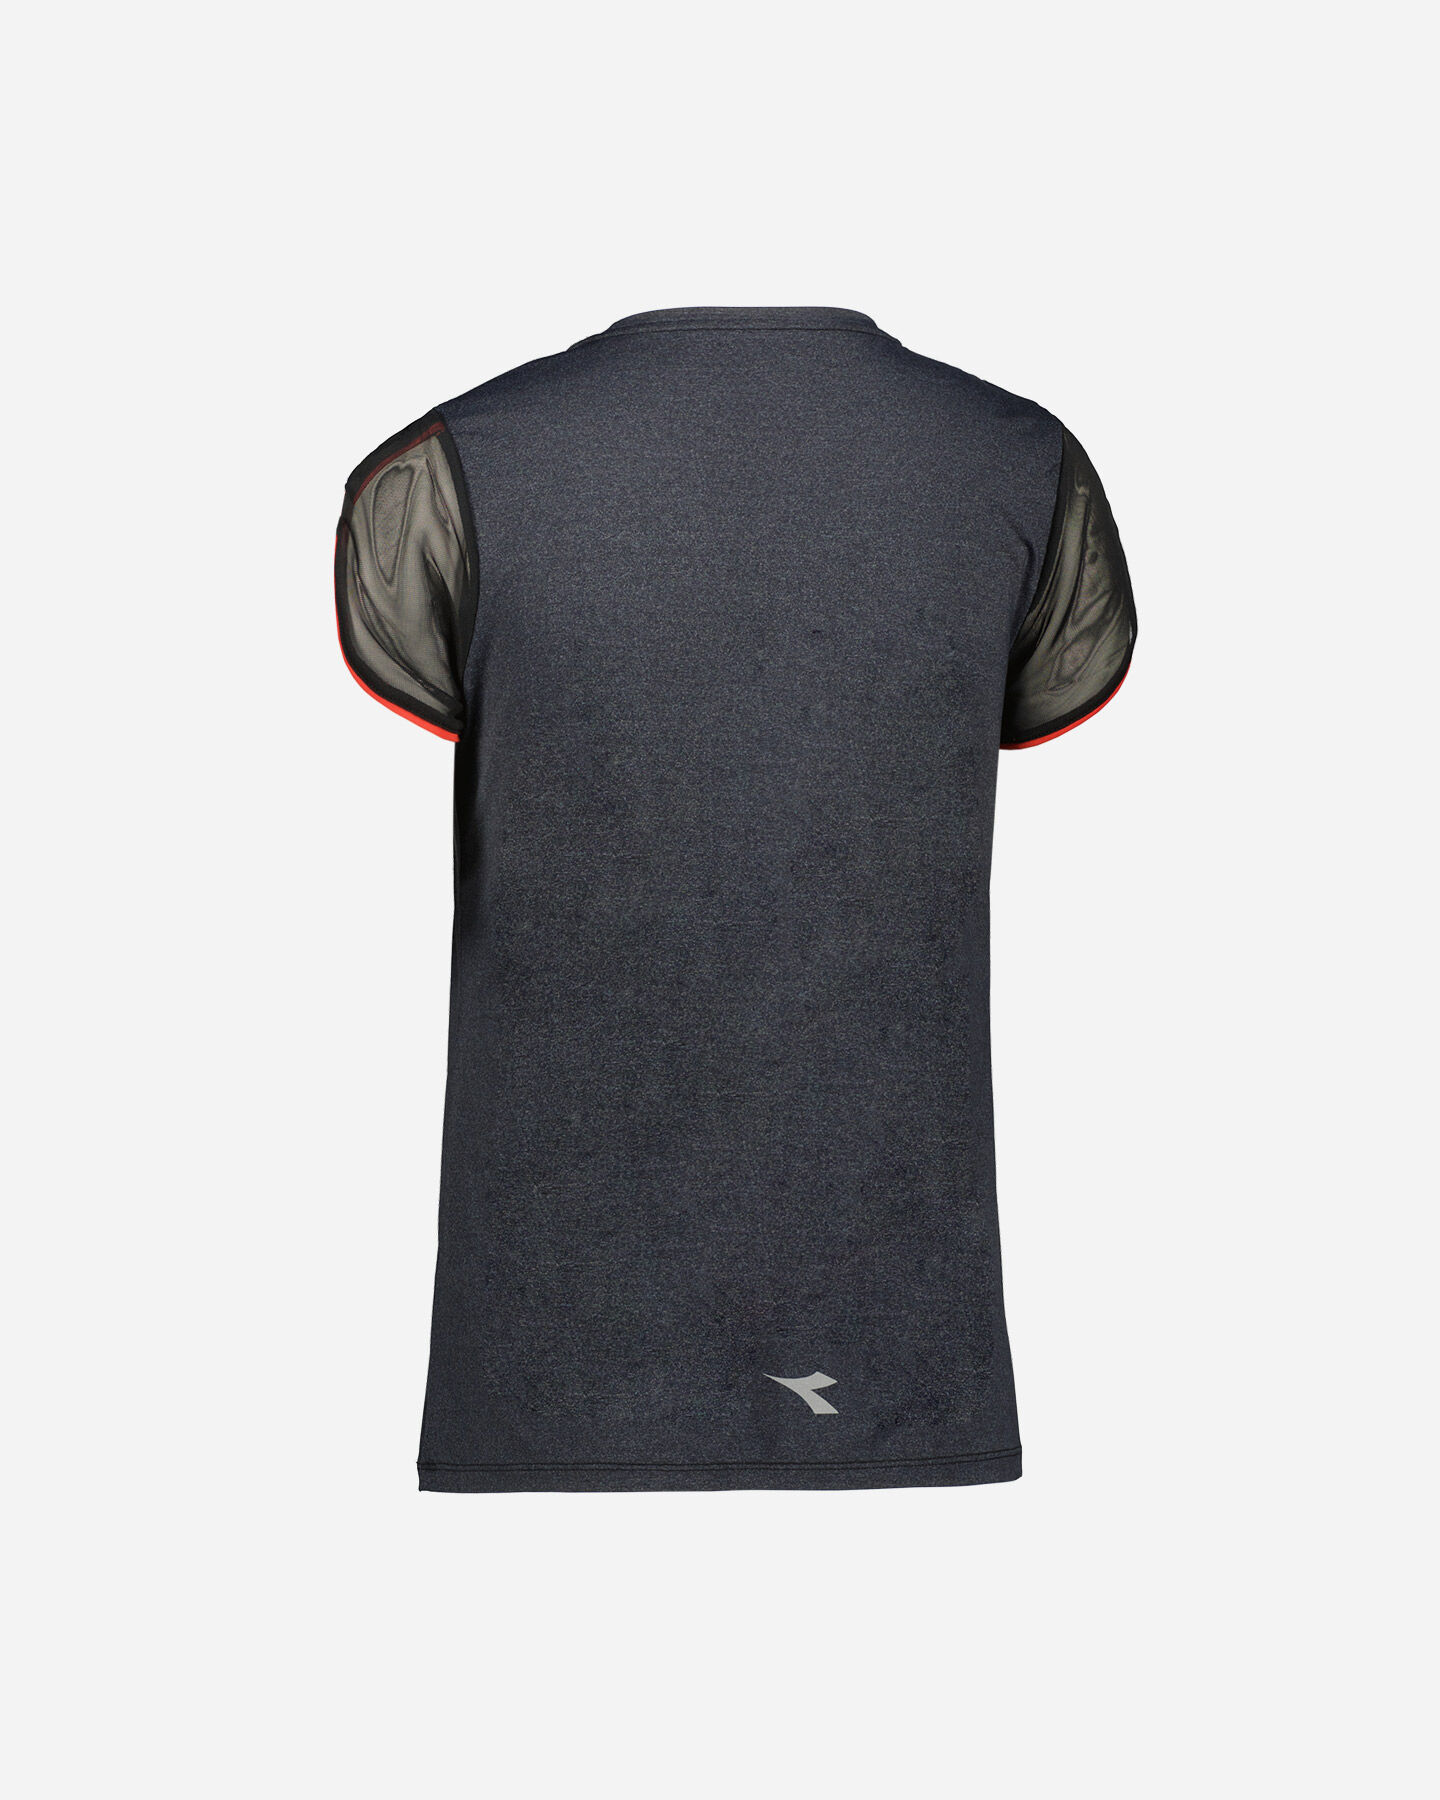  T-Shirt running DIADORA BE ONE W S5400809|80013|XS scatto 1